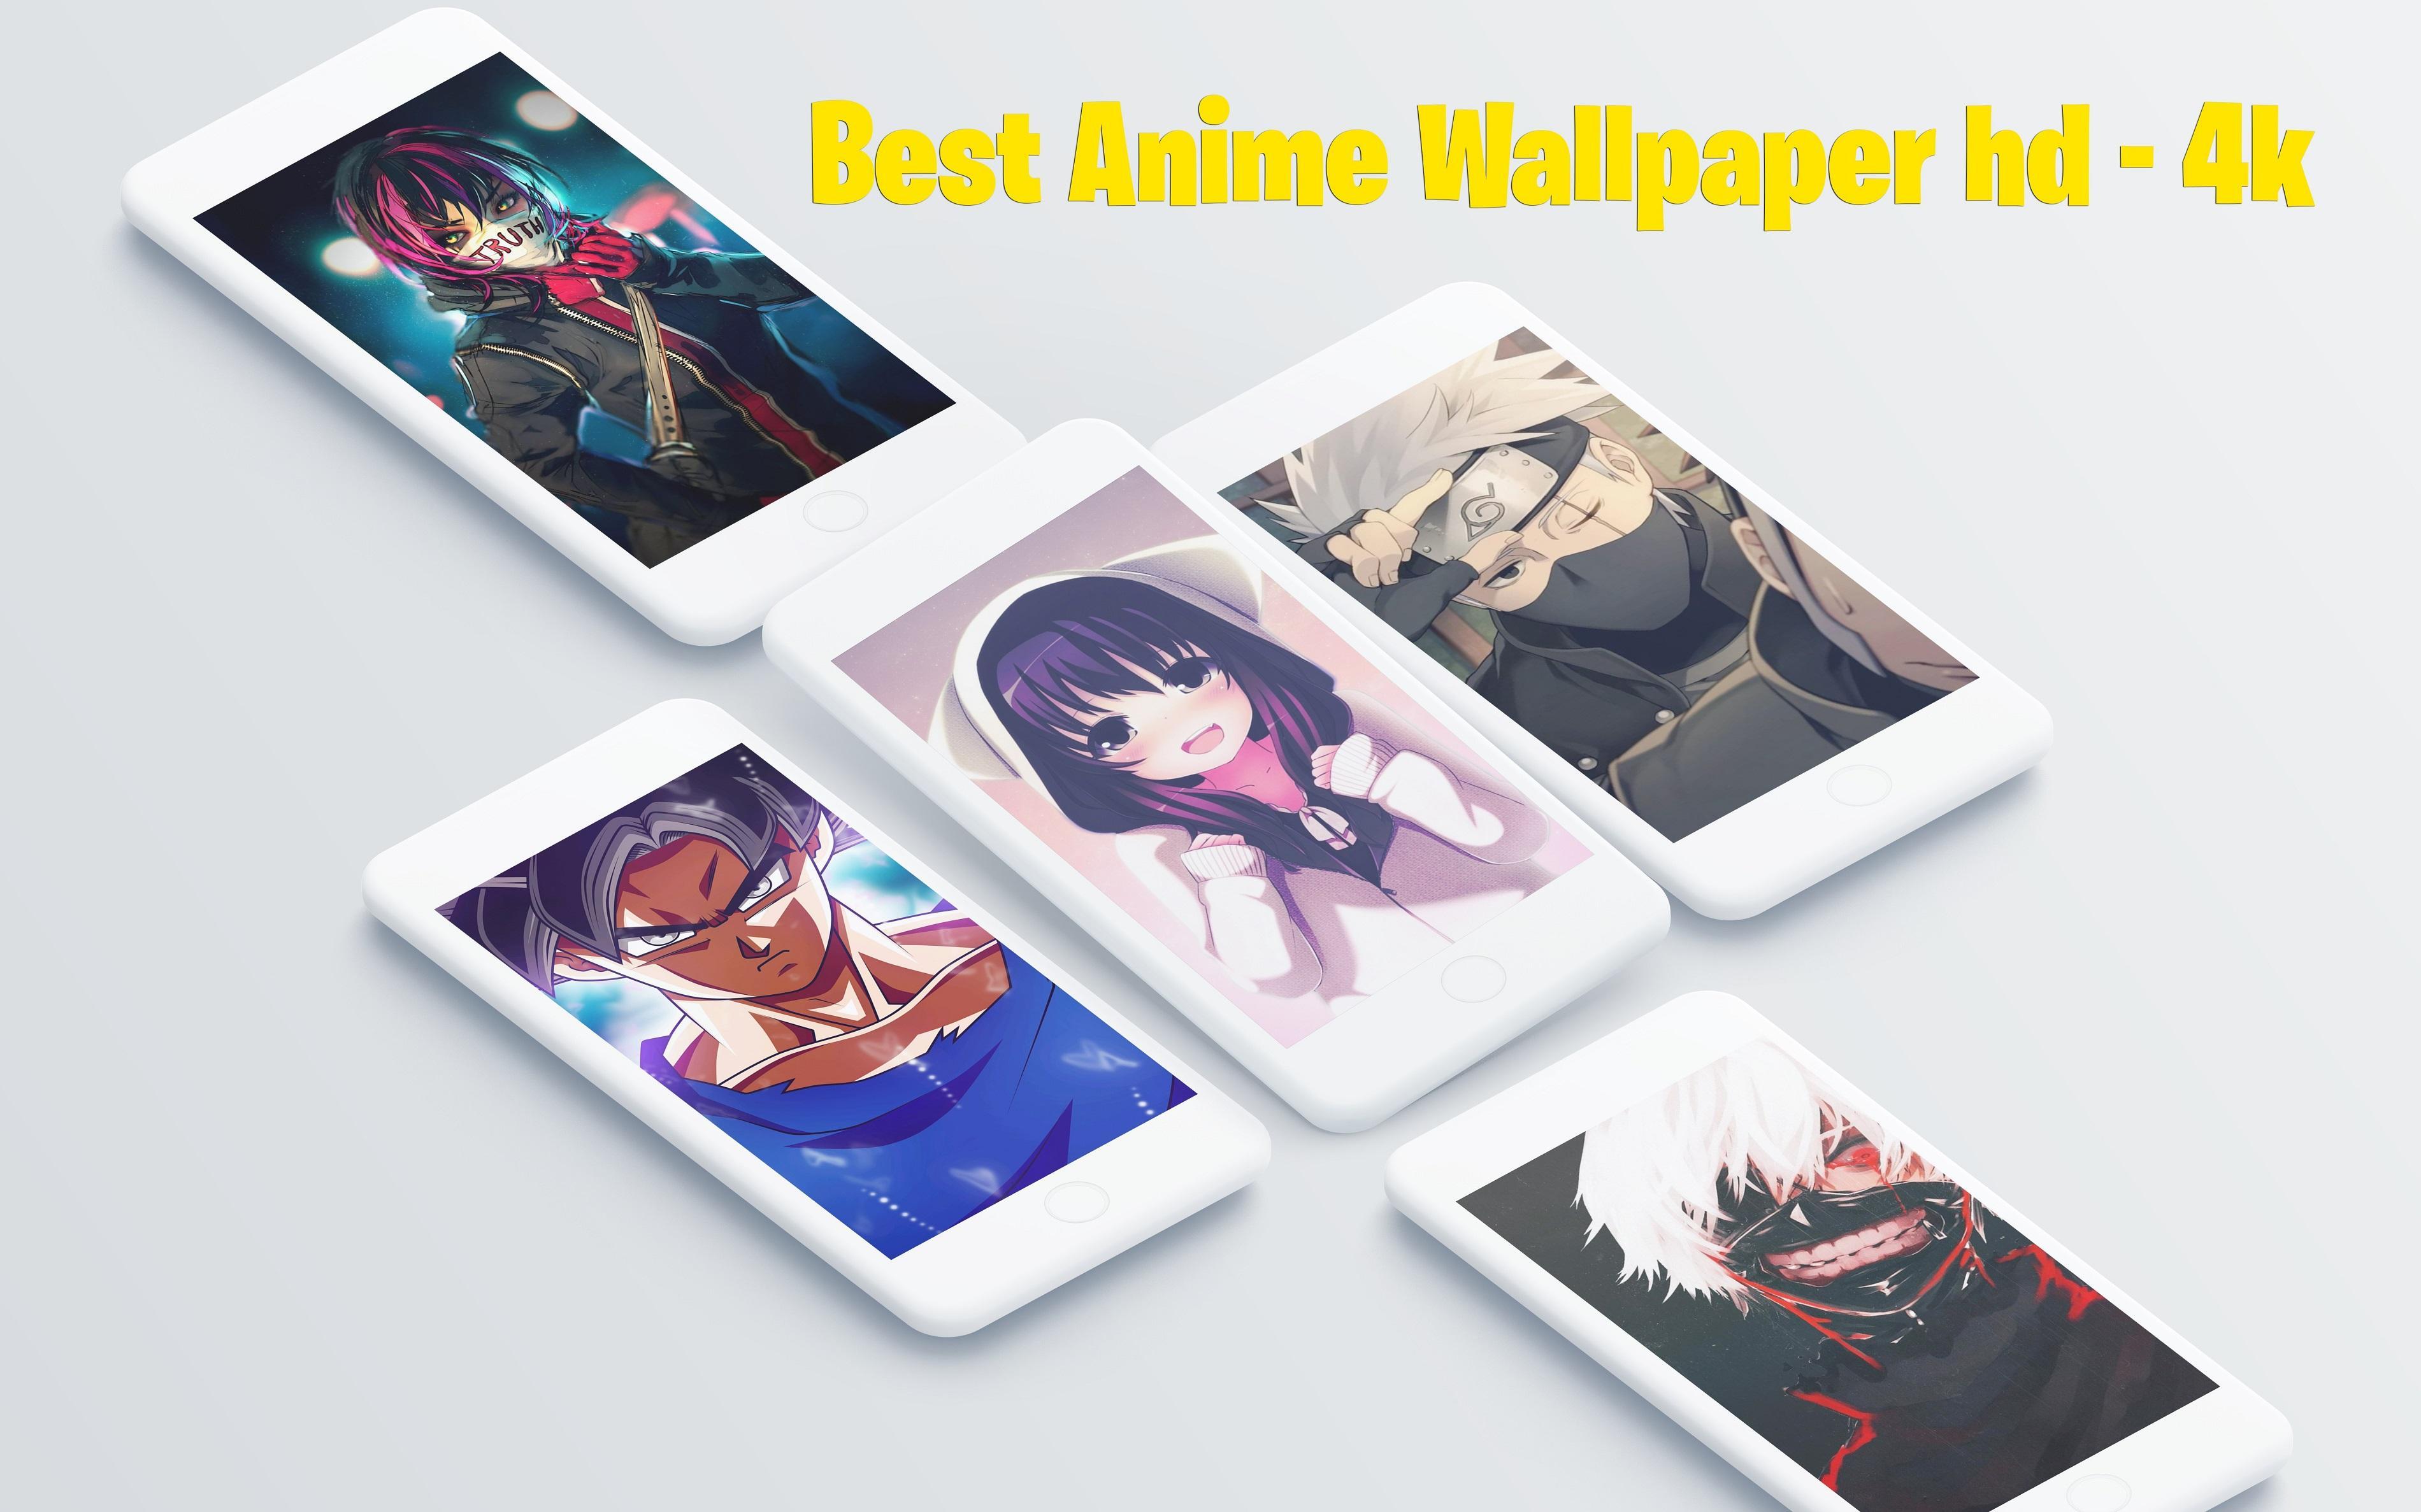 Best Anime Wallpaper hd   4k backgrounds 2020 for Android   APK